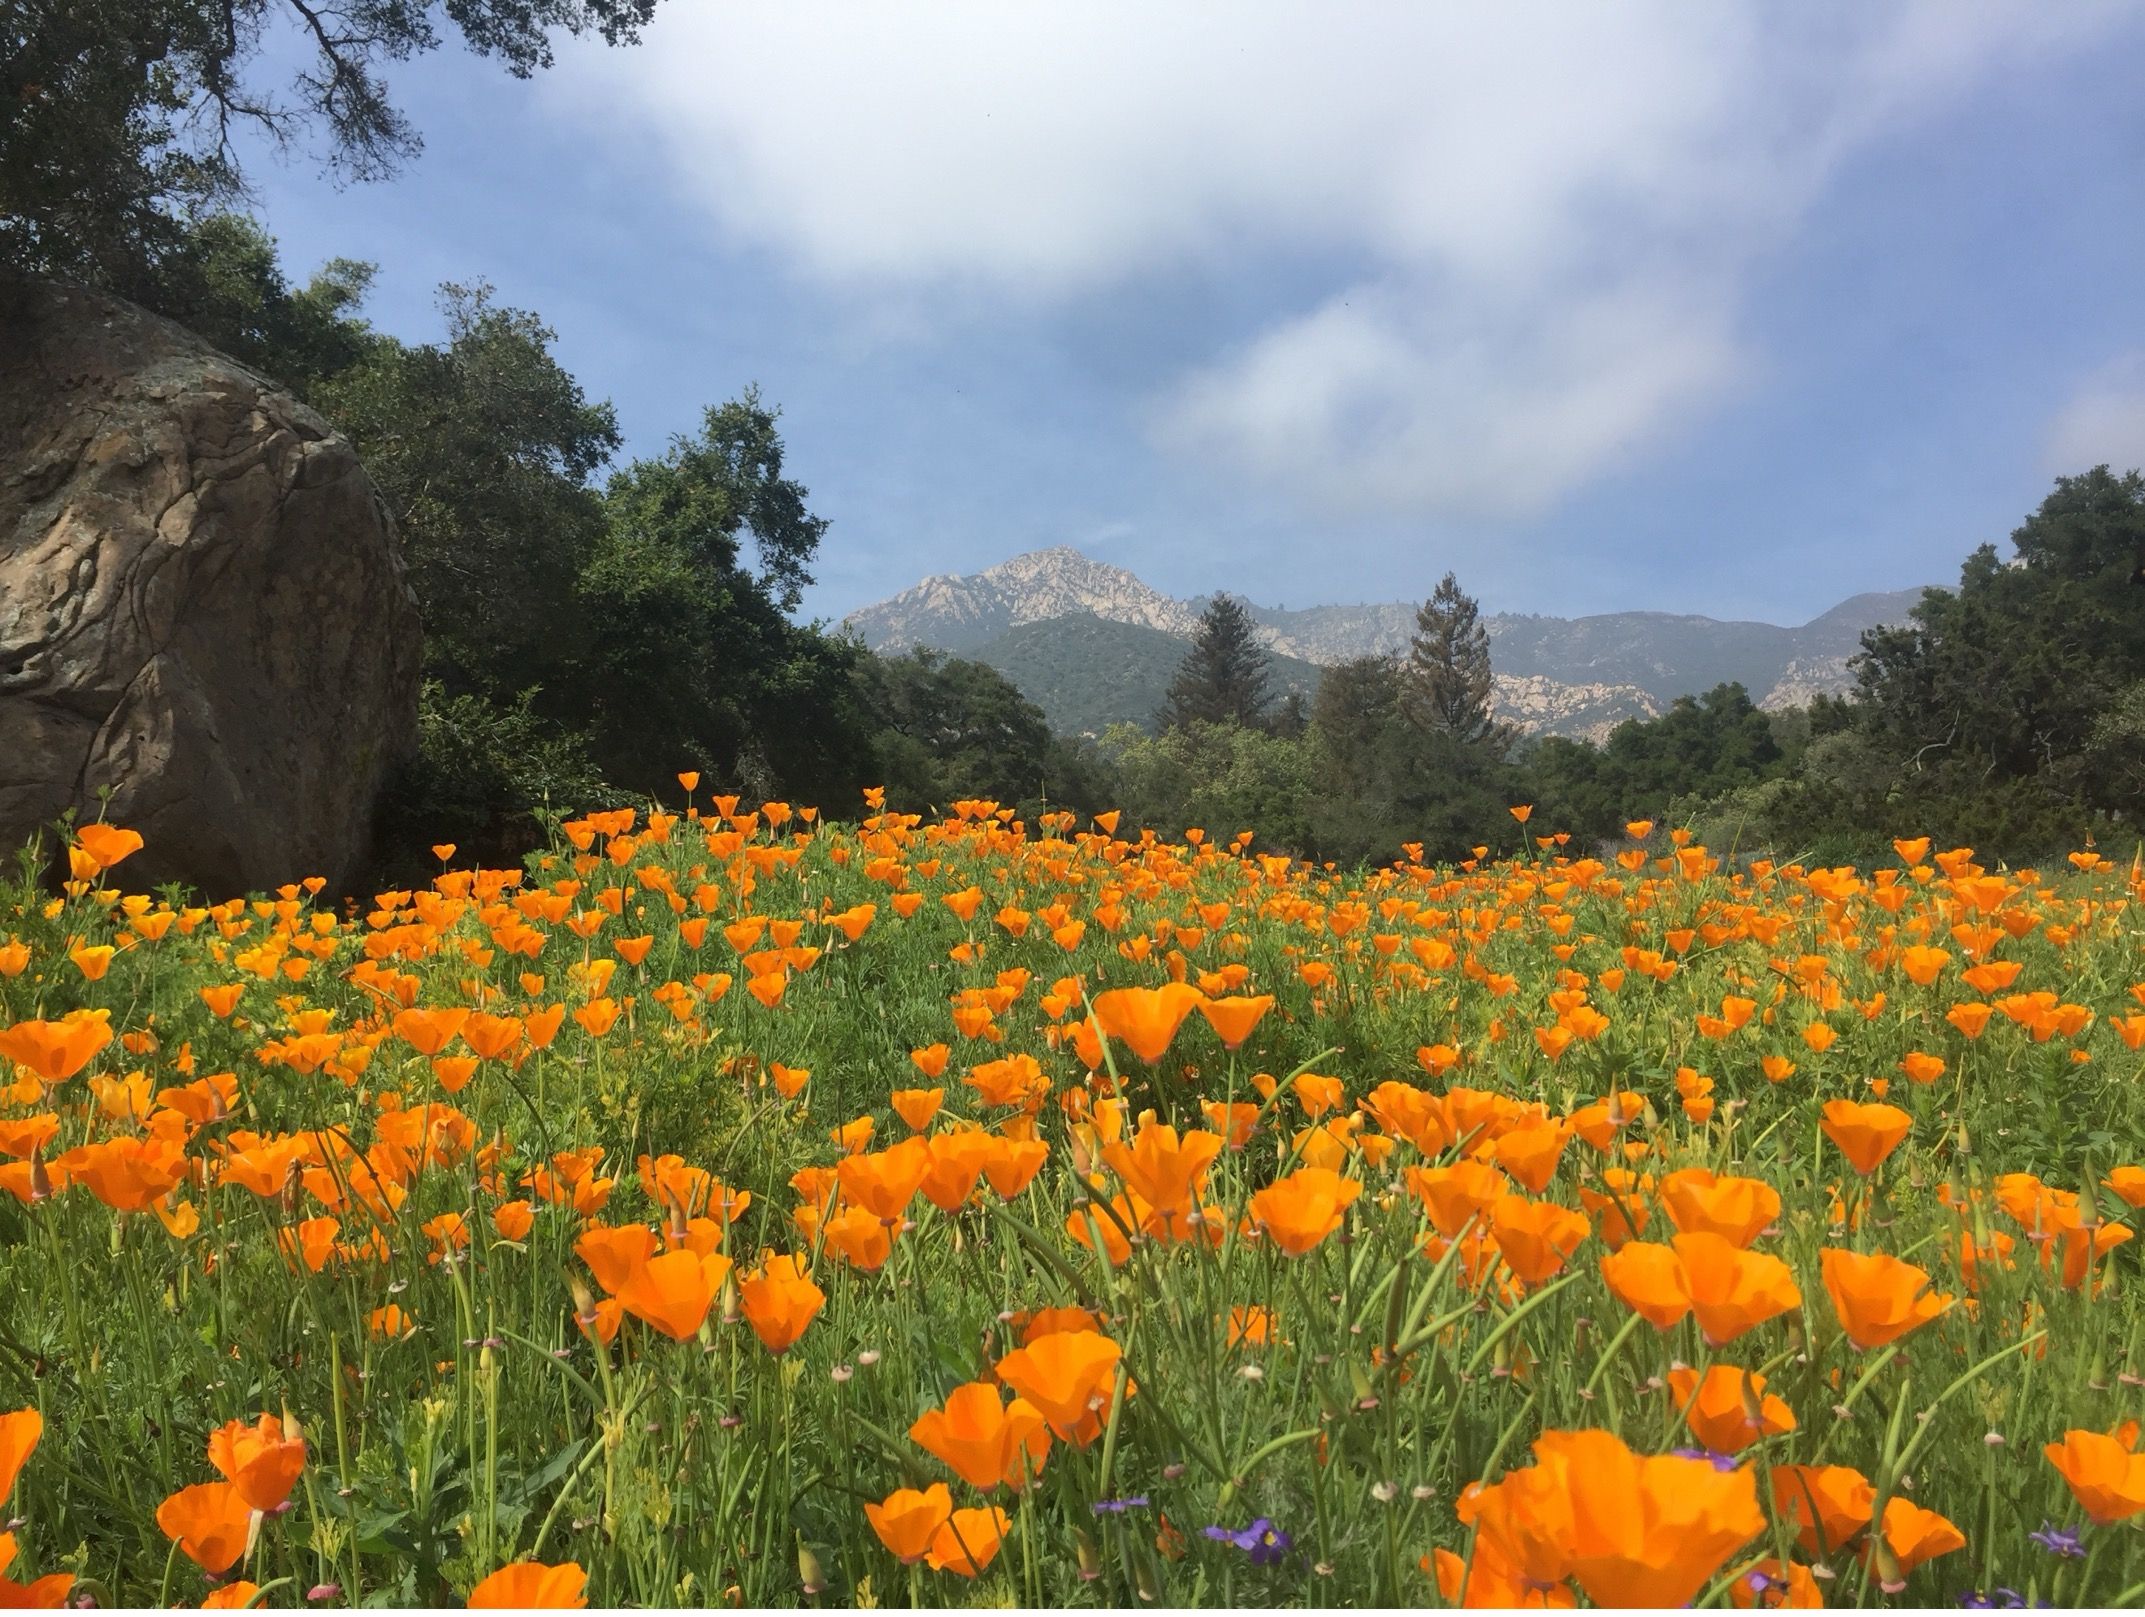 A field of California poppies with mountains in the background at the Santa Barbara Botanic Gardens in the sunshine.